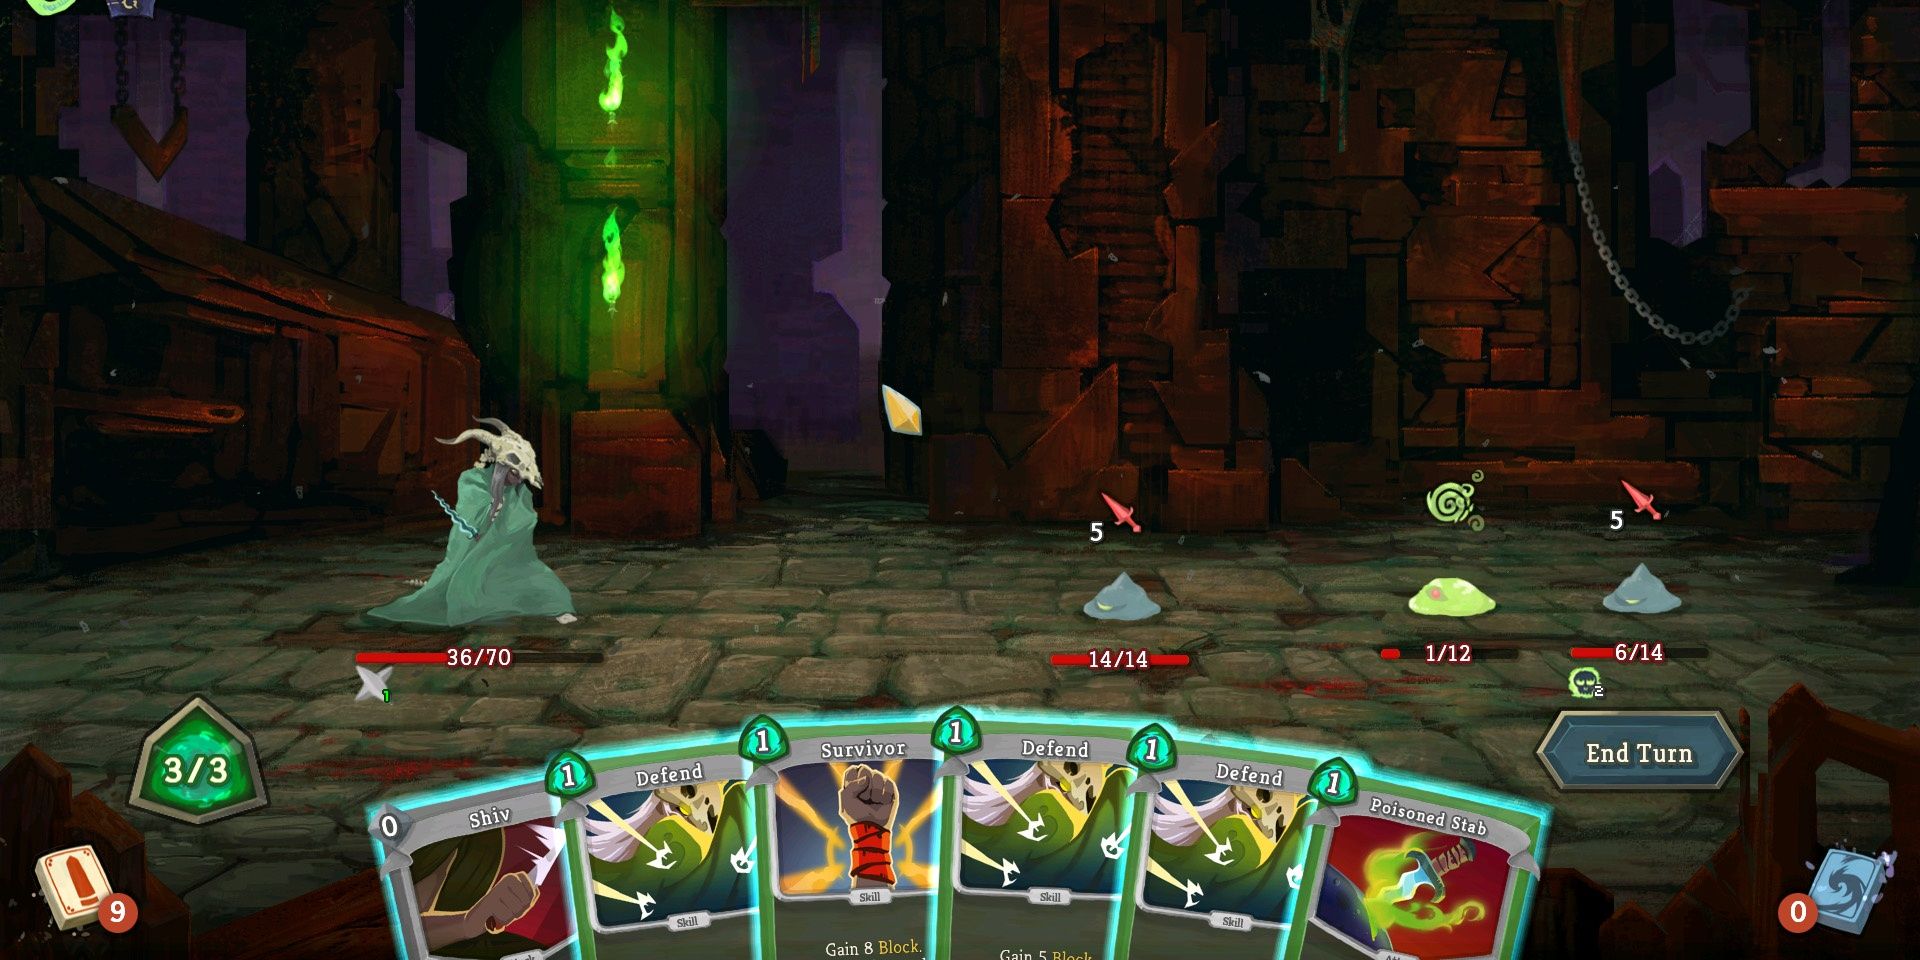 A screenshot showing an enemy encounter and a deck of cards in Slay the Spire